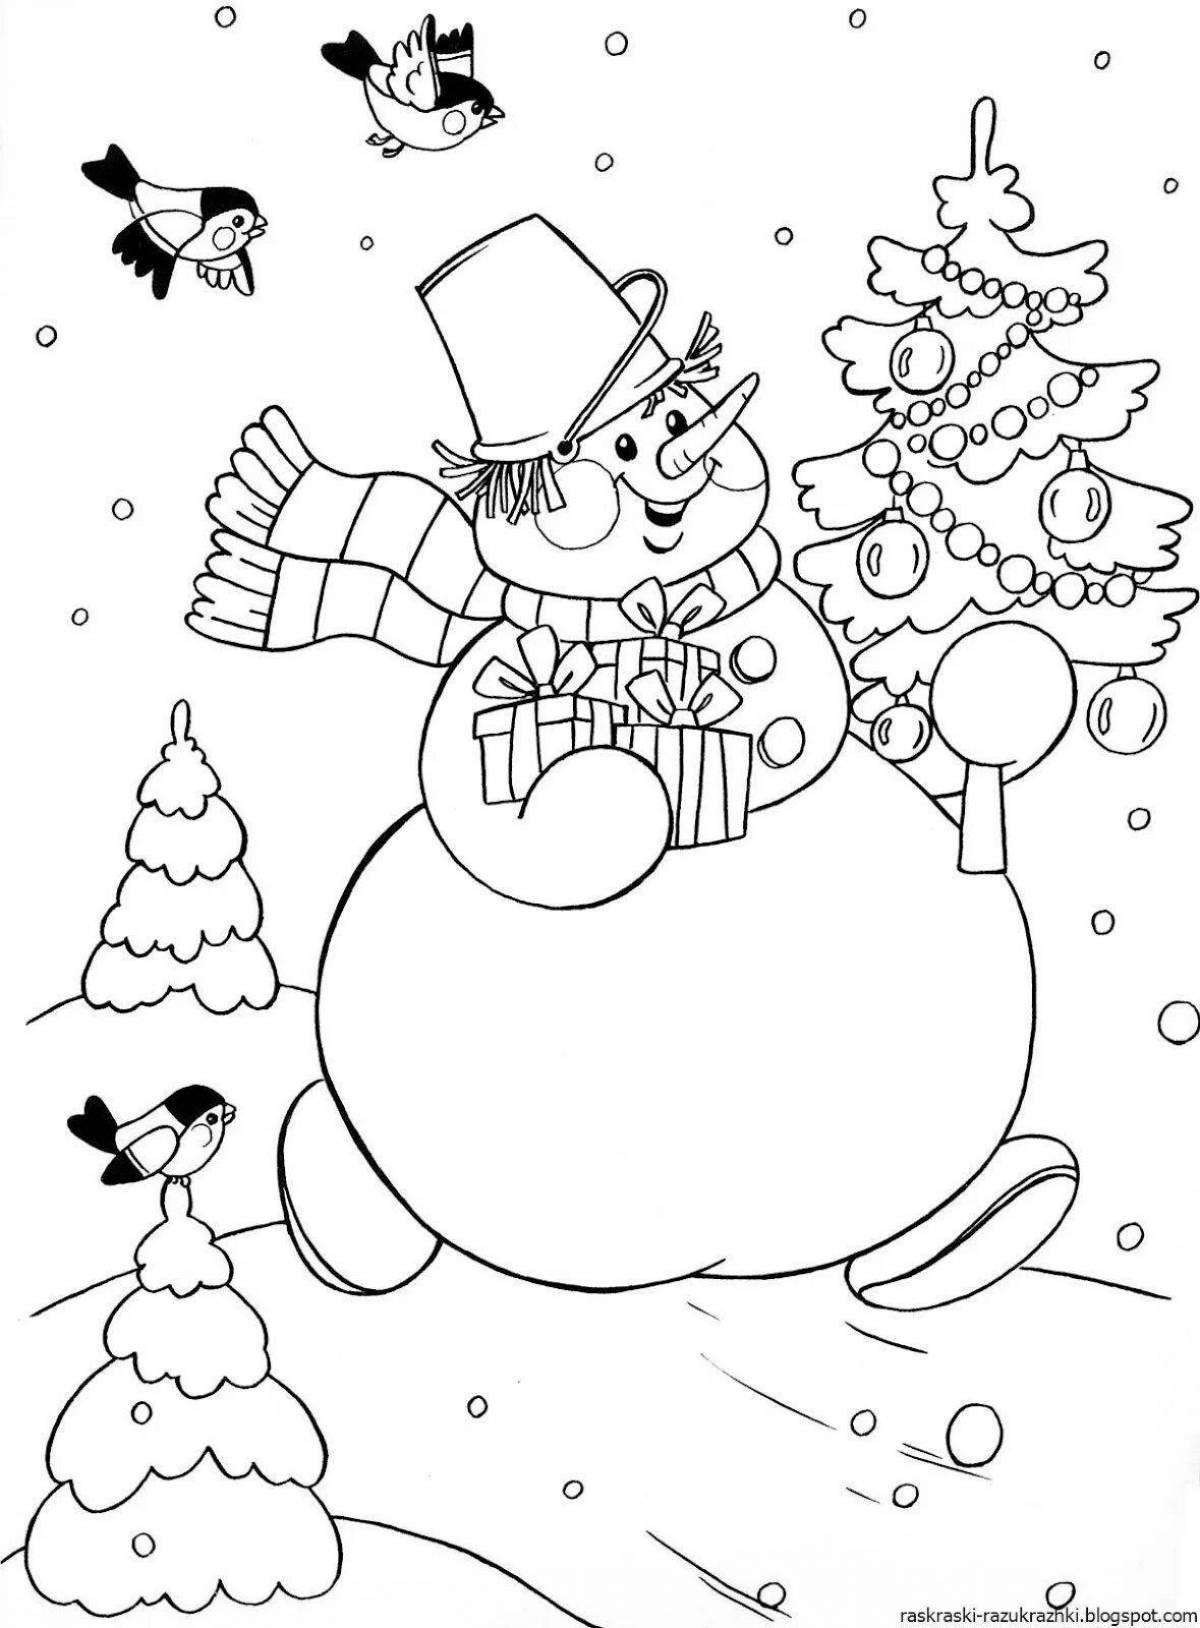 Glitter snowman coloring book for kids 6-7 years old